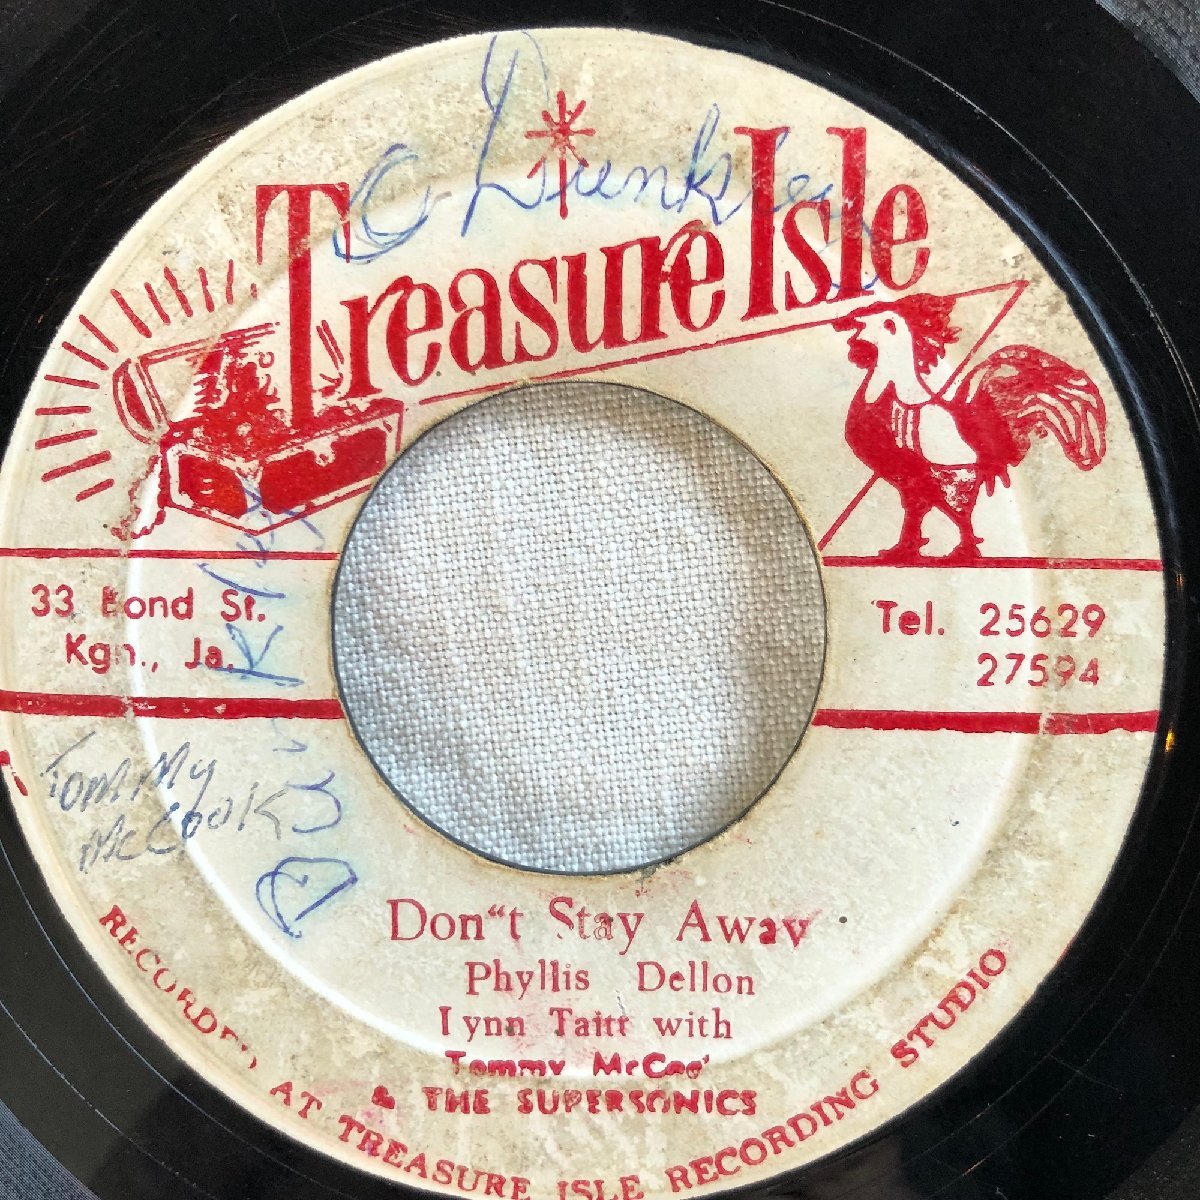 Phyllis Dillon Lynn Taitt With Tommy McCook & The Supersonics Upsetters / Don\'t Stay Away Lock Jaw 7inch Treasure Isle